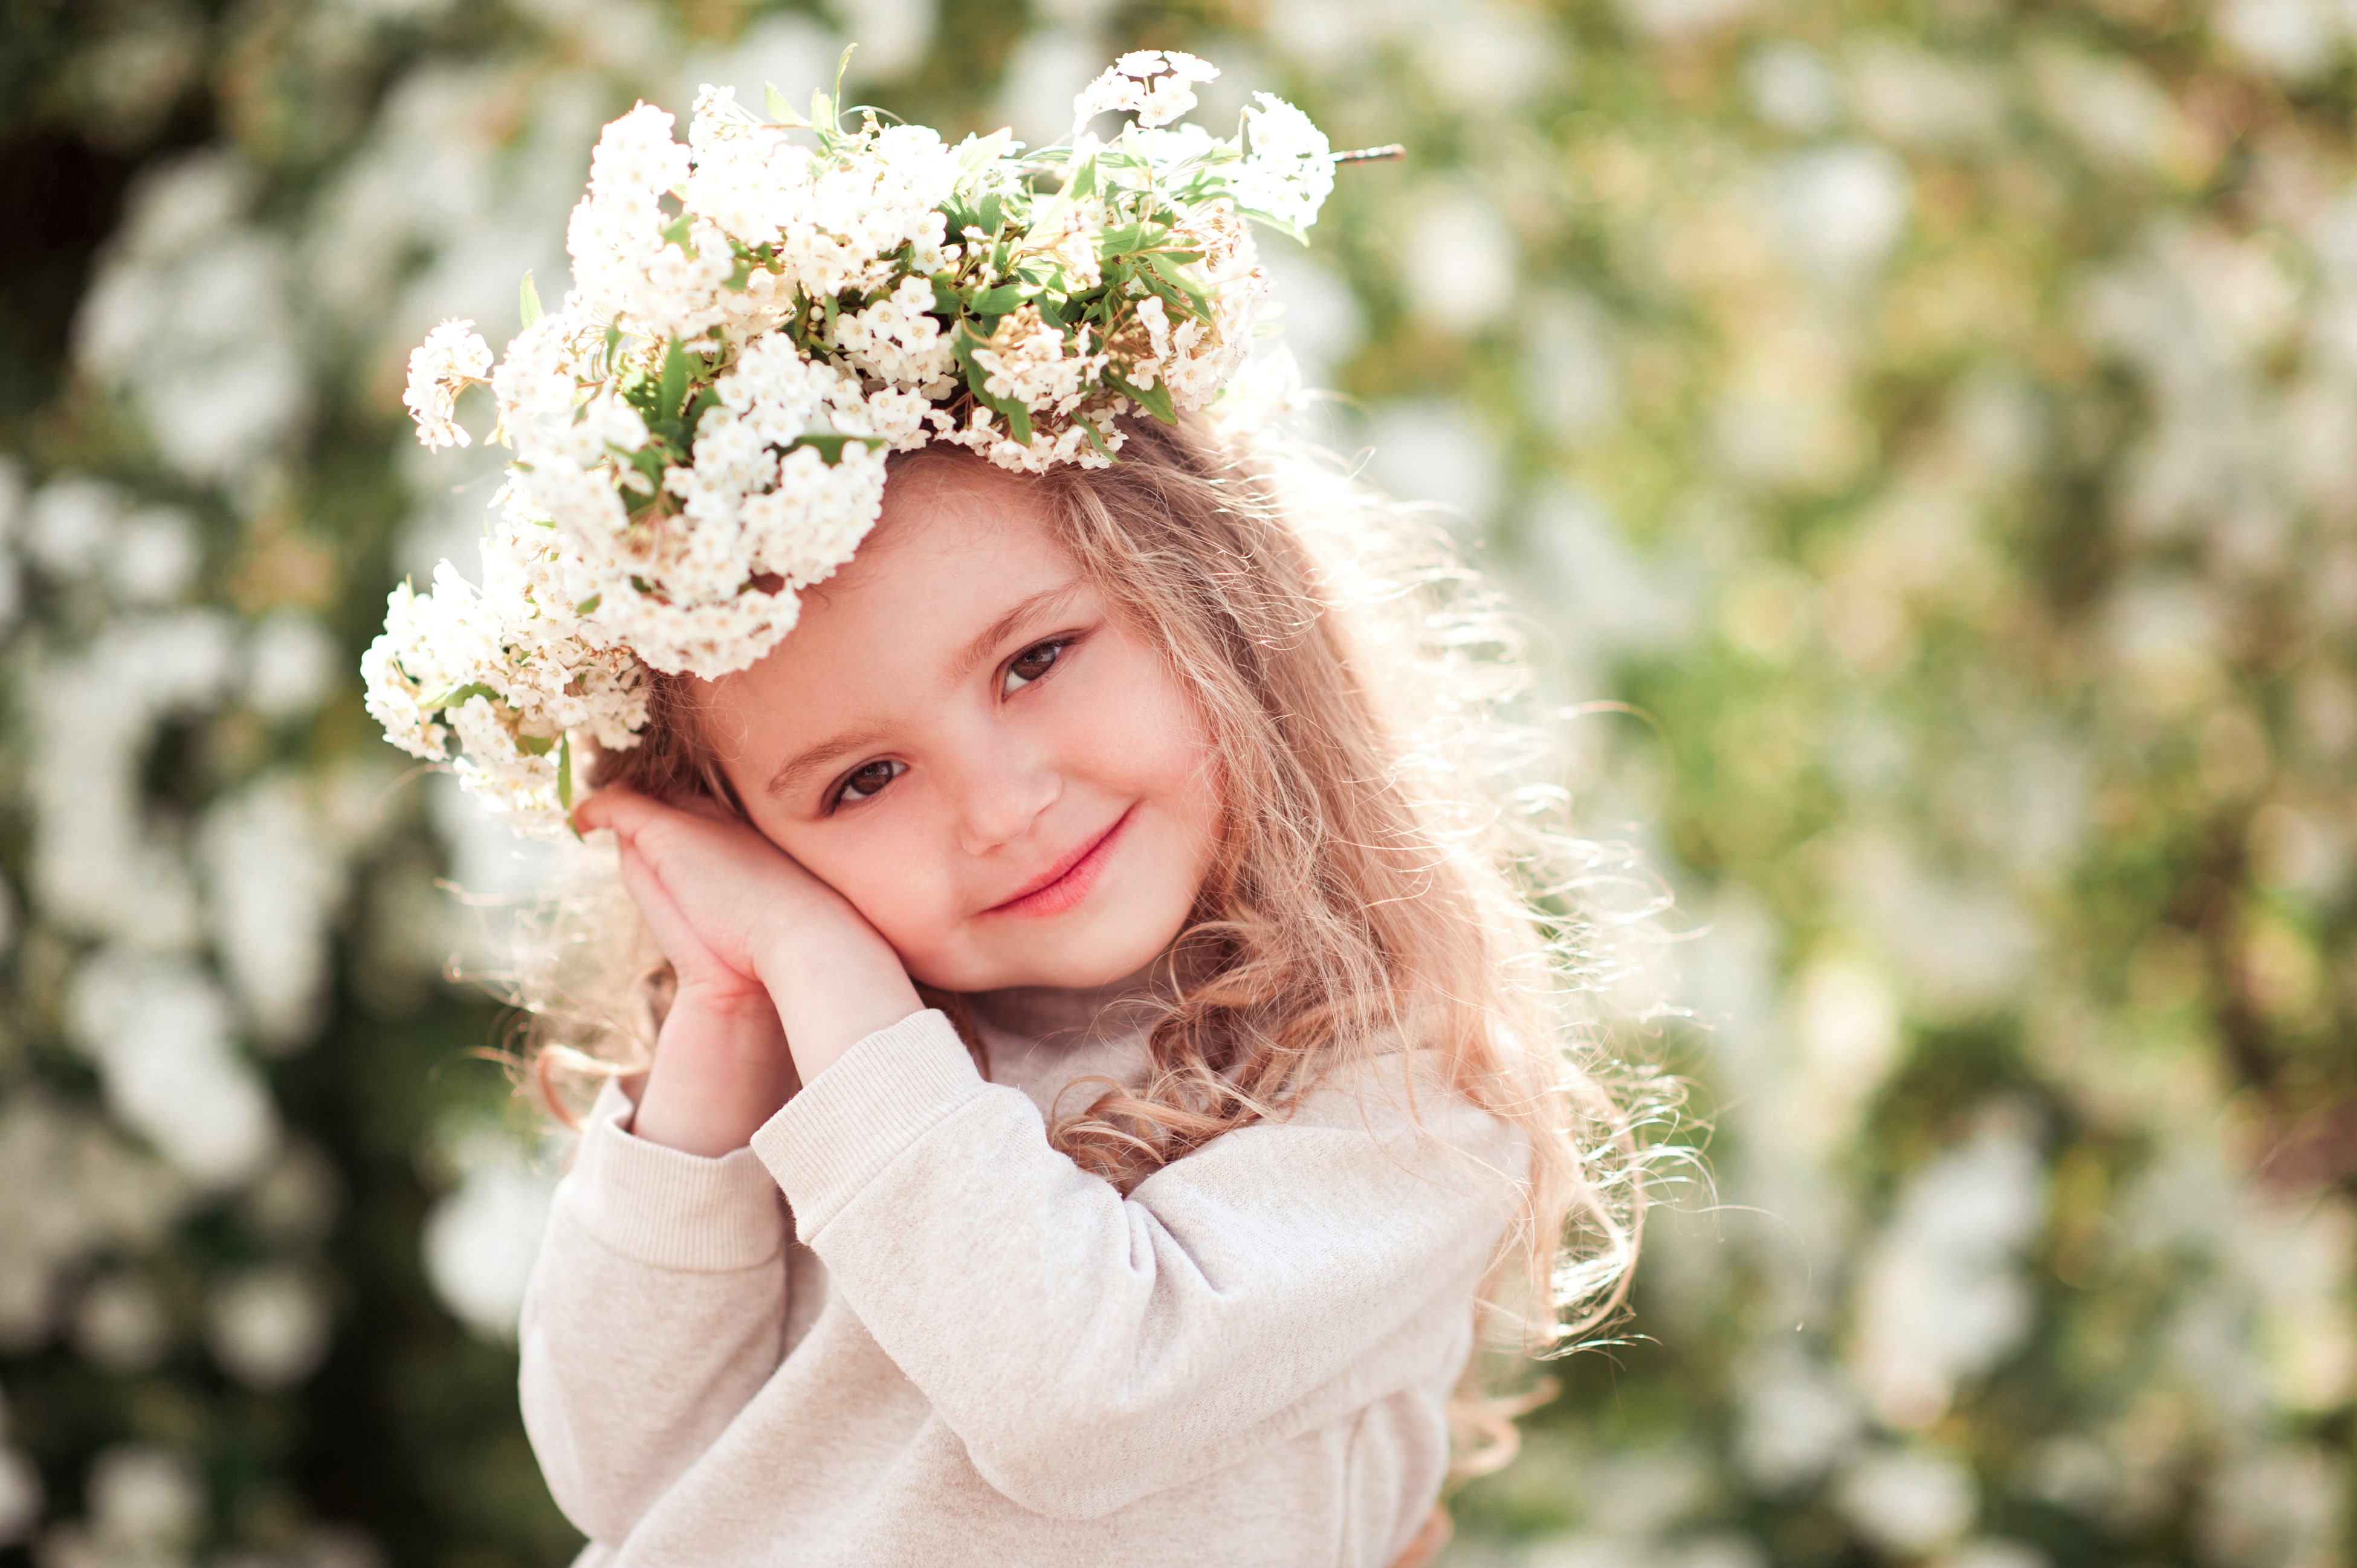 little girl wallpaper,people in nature,child,photograph,headpiece,hair accessory